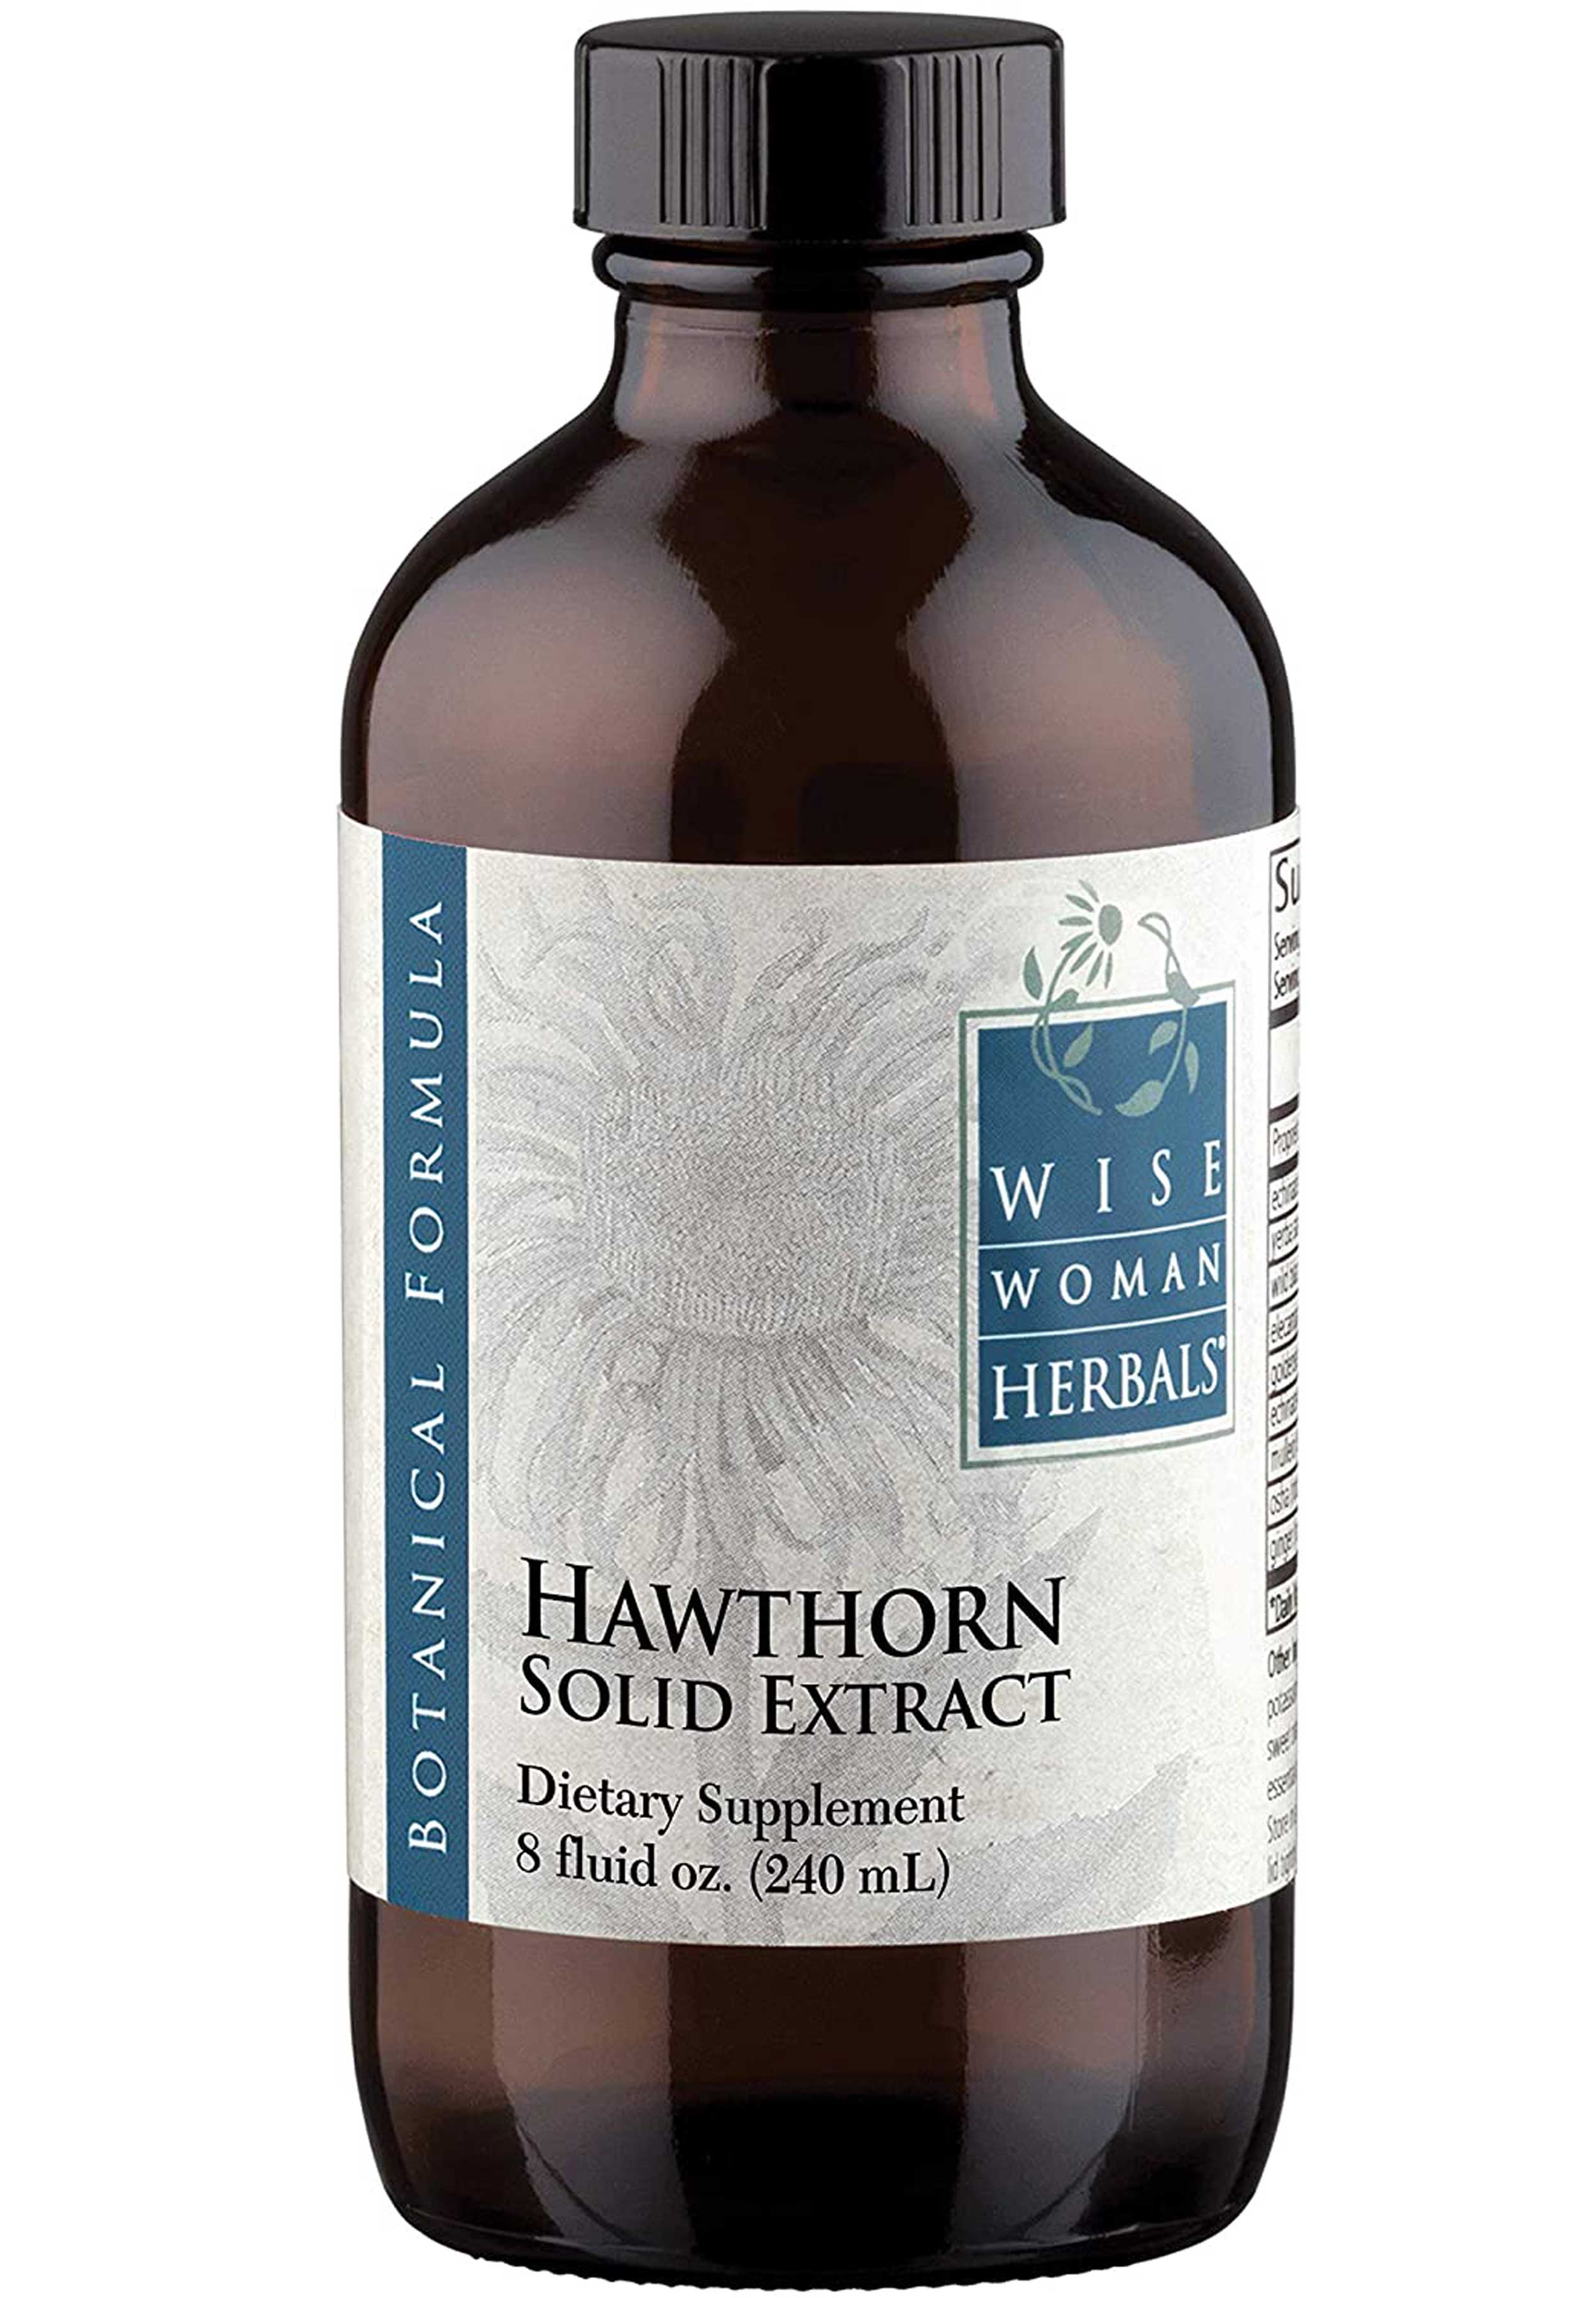 Wise Woman Herbals Hawthorn Solid Extract